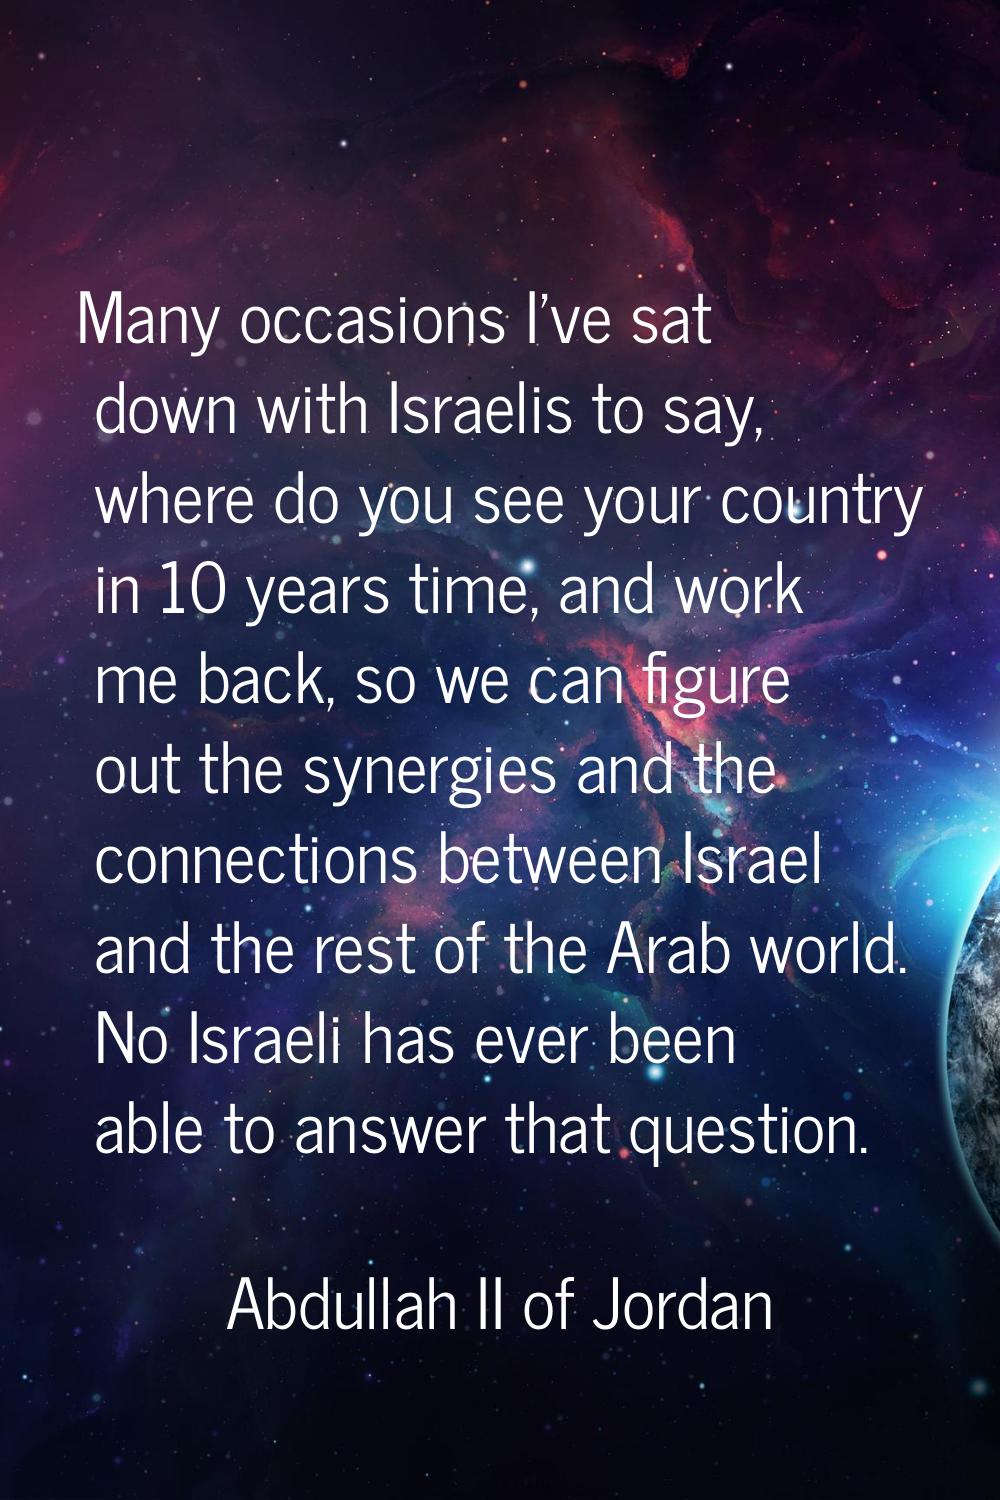 Many occasions I've sat down with Israelis to say, where do you see your country in 10 years time, 